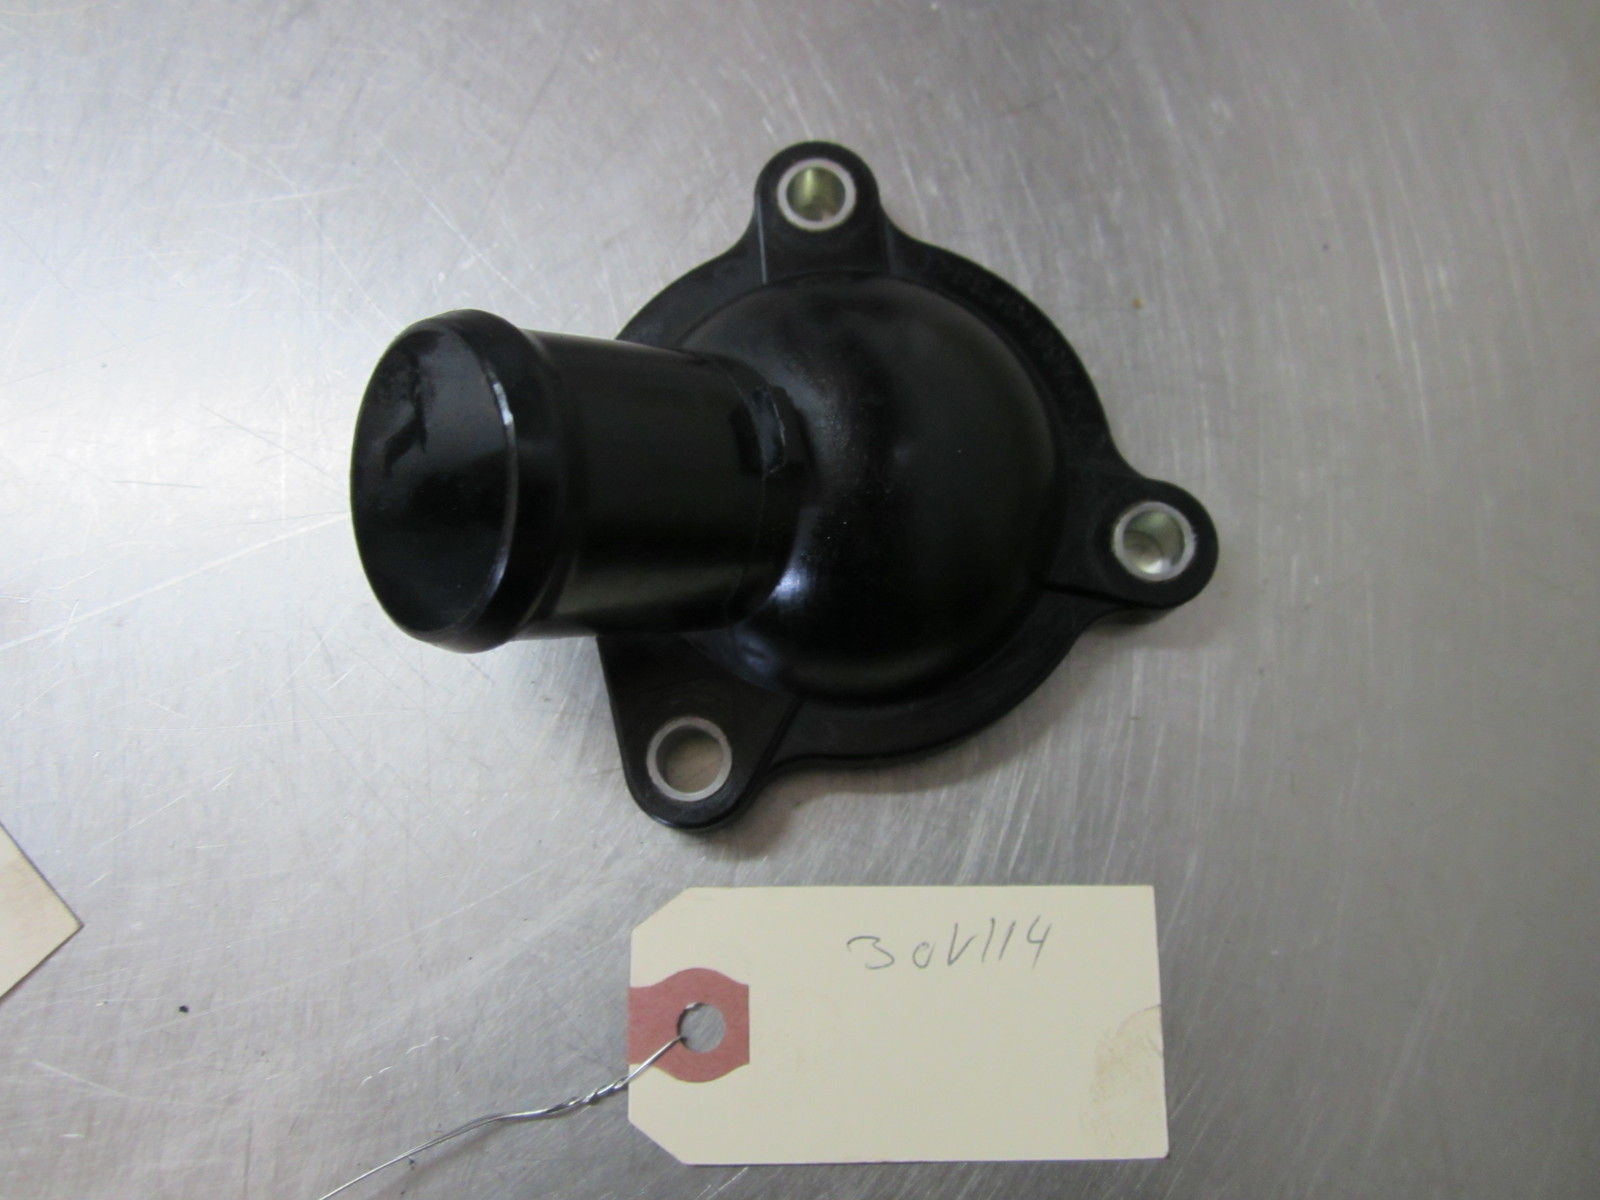 Thermostat Housing From 2009 Nissan Titan  5.6 - $25.00